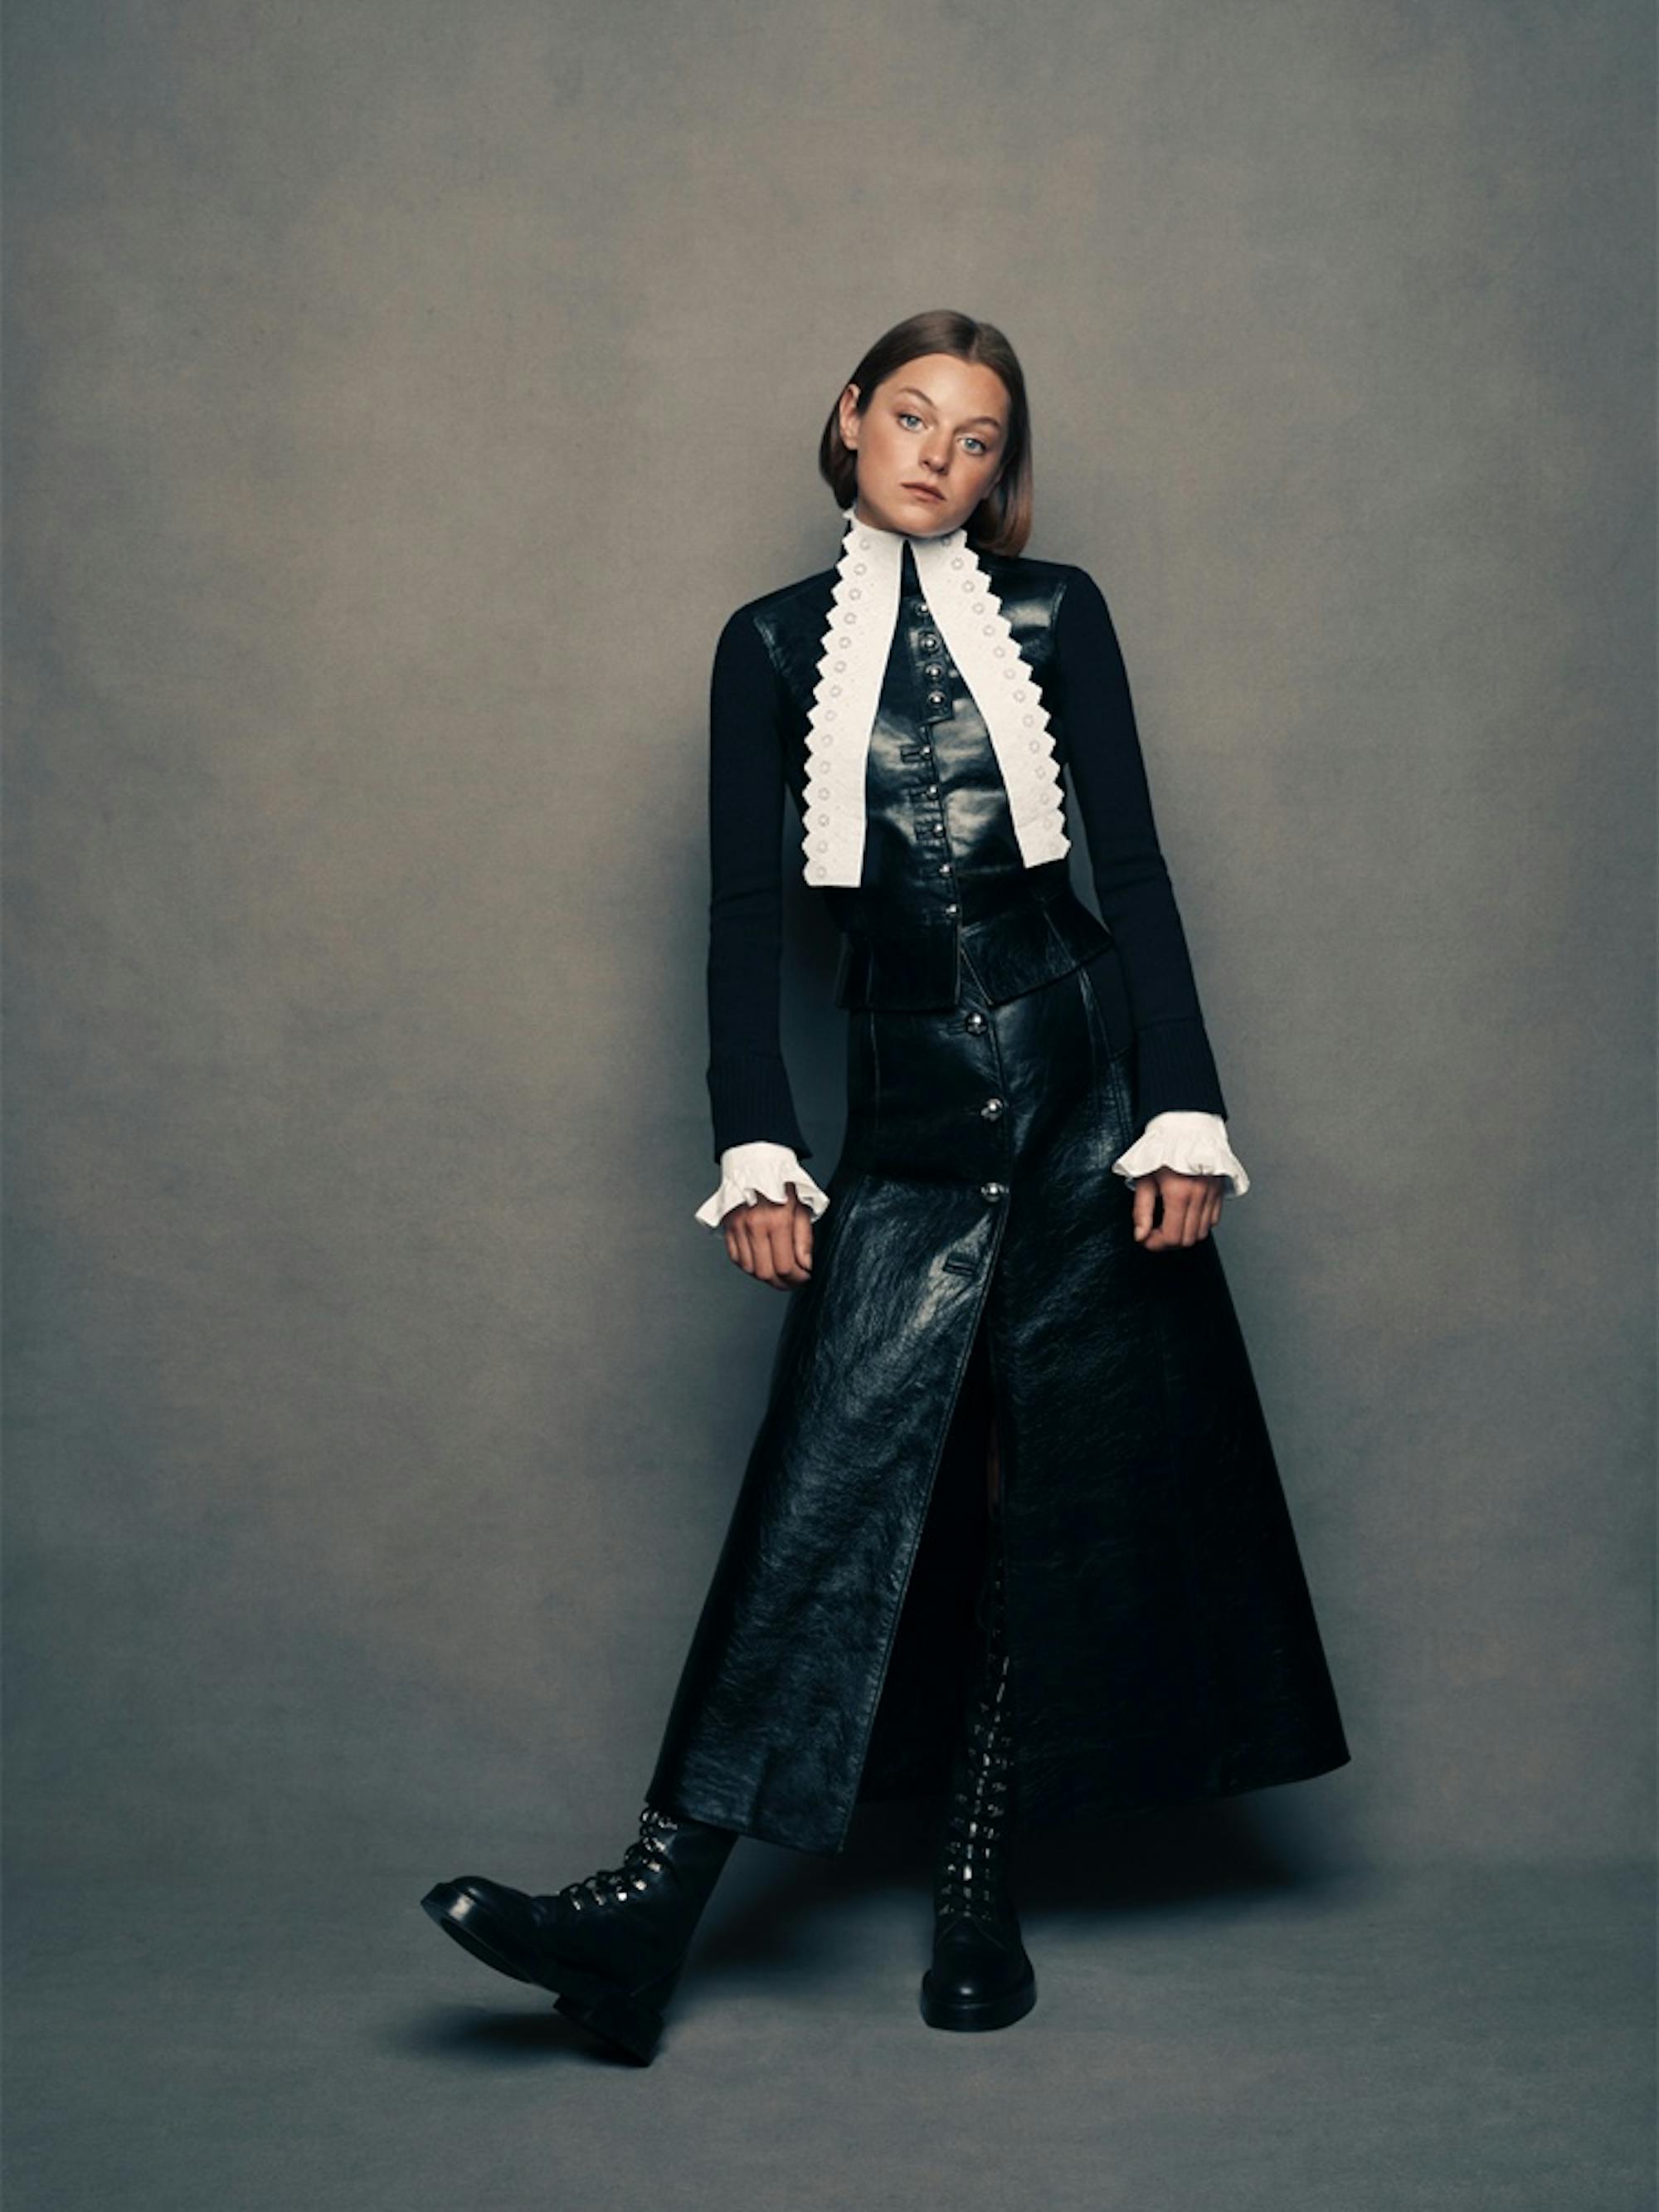 Emma Corrin against the same slate-gray background, wearing chunky black boots, a black leather vest with white-lace detail at the neck, and a matching long skirt with silver buttons. She leans casually to her left side.